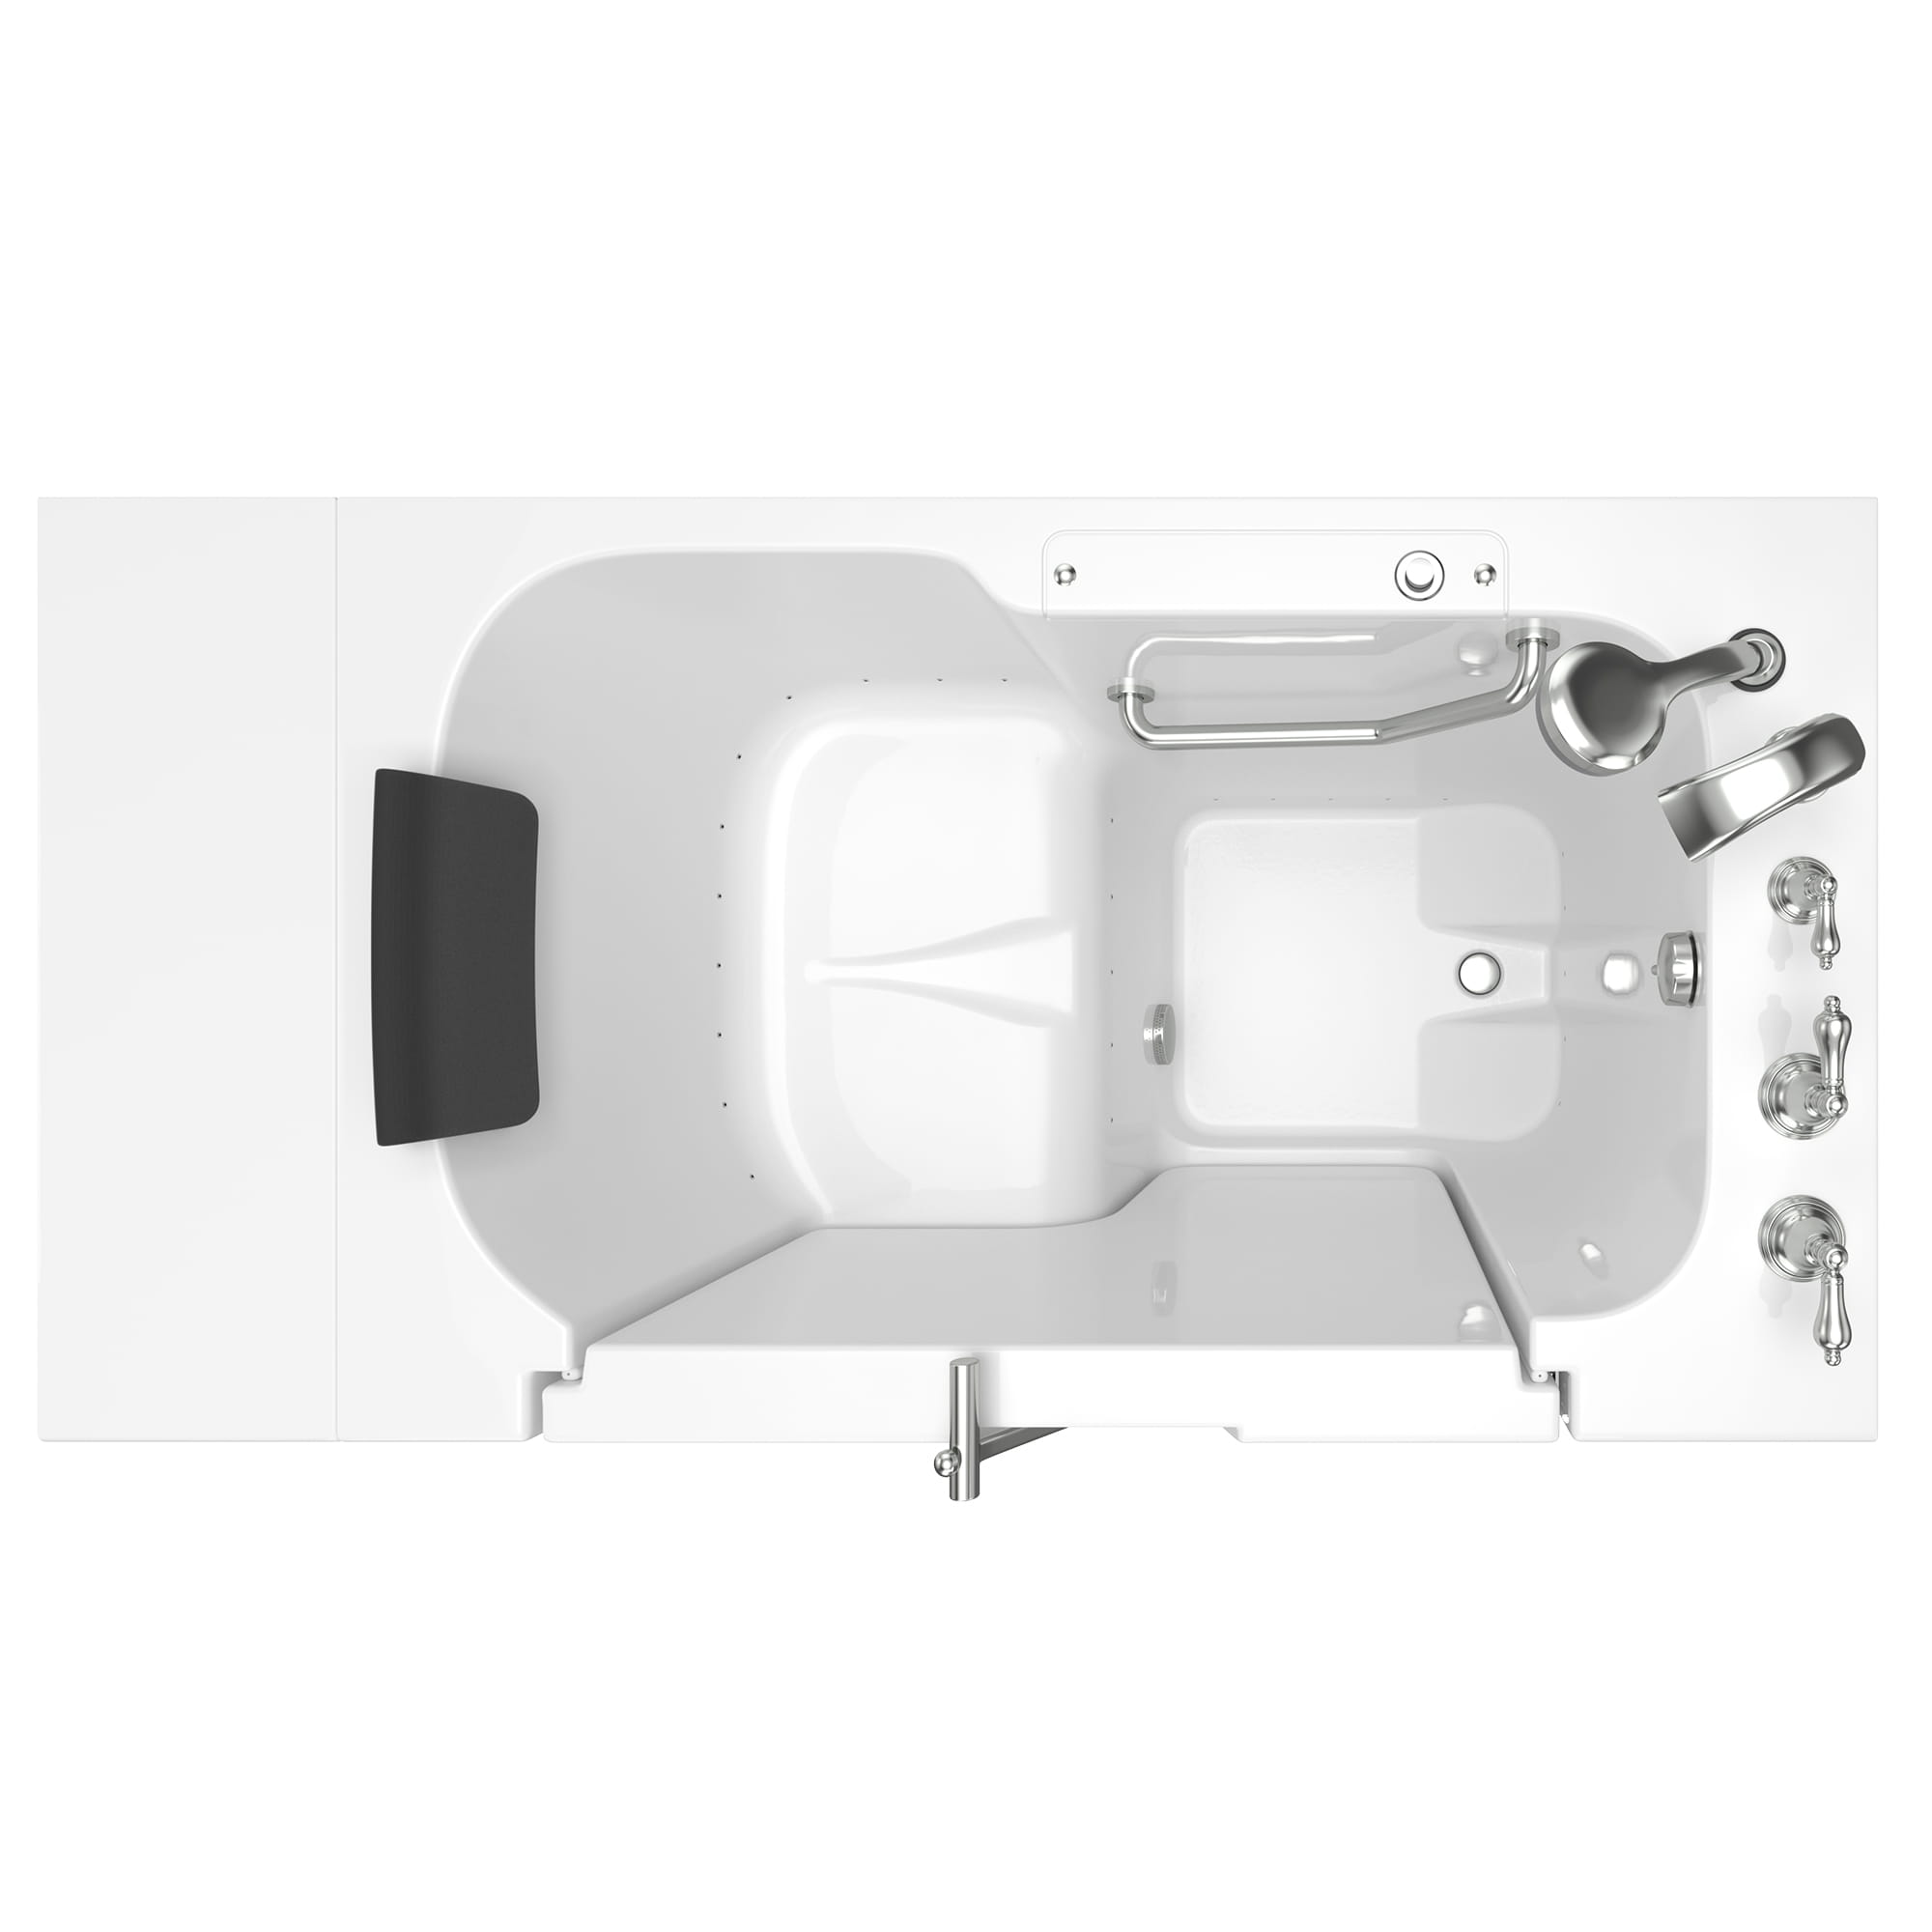 Gelcoat Premium Series 32 x 52 -Inch Walk-in Tub With Air Spa System - Right-Hand Drain With Faucet